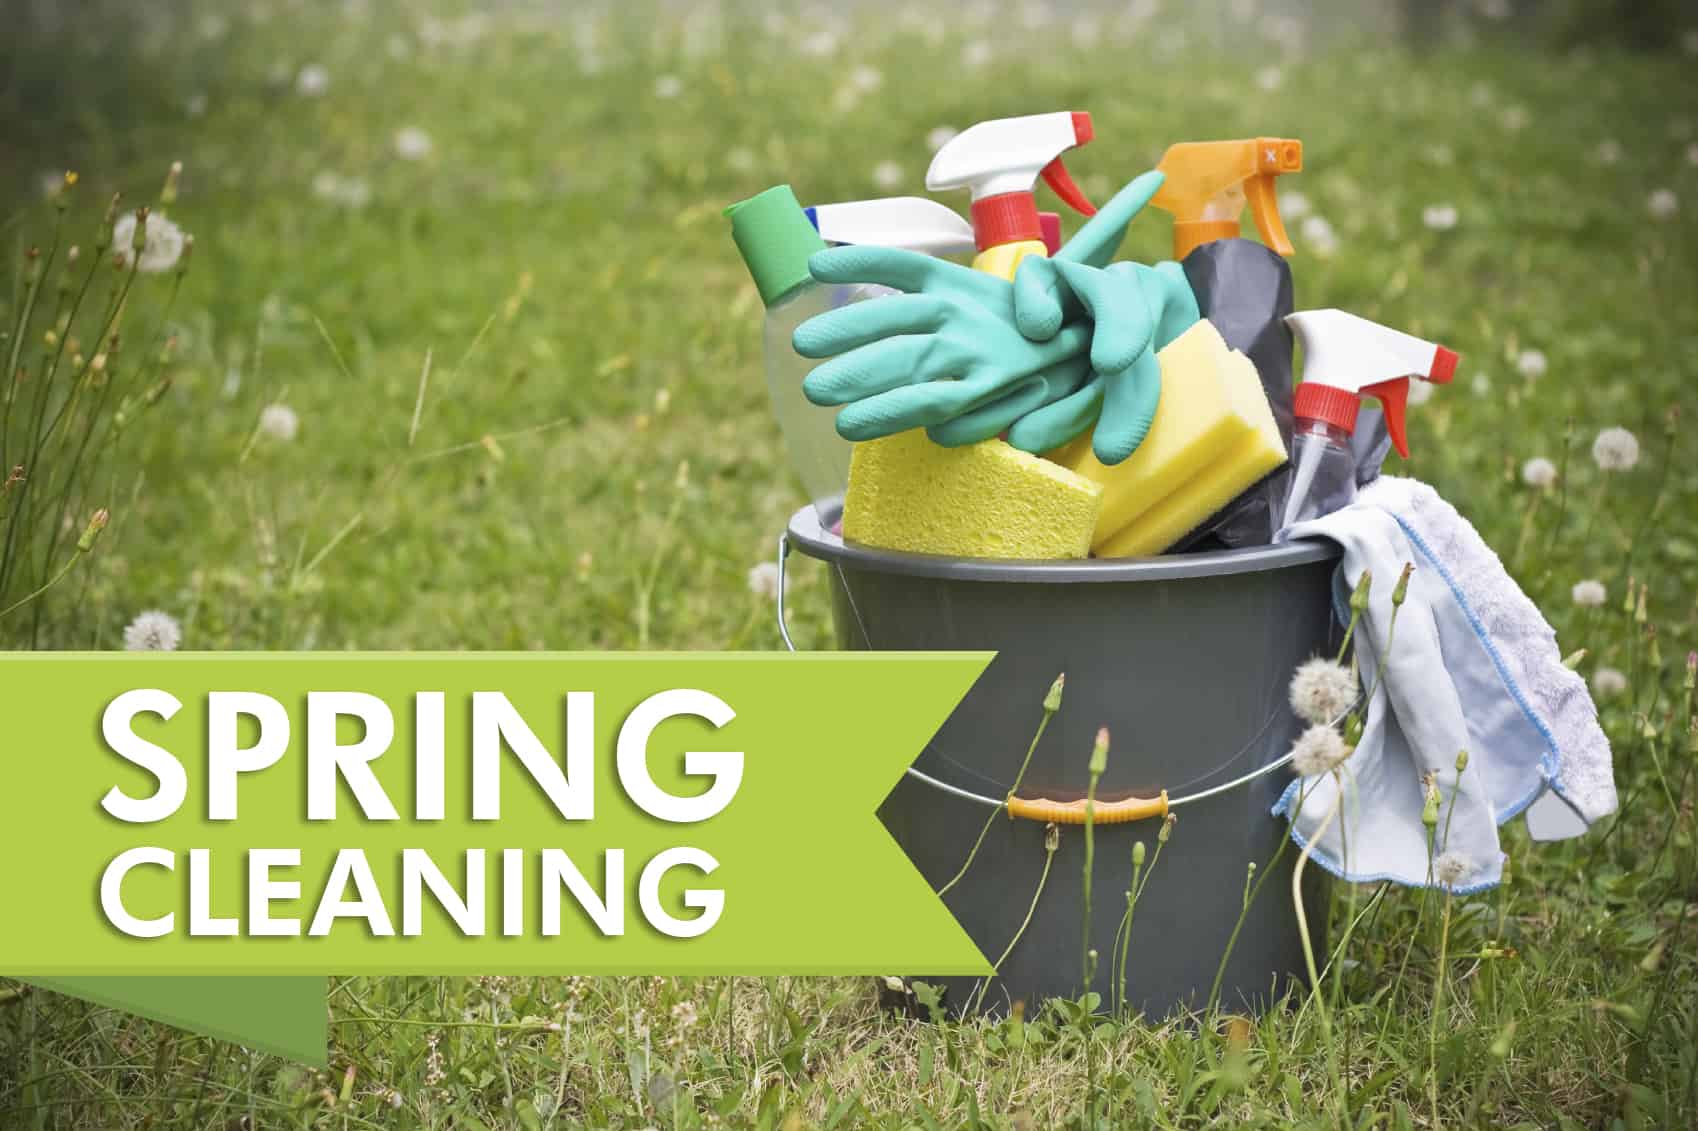 2019 spring cleaning day for pleasant grove utah